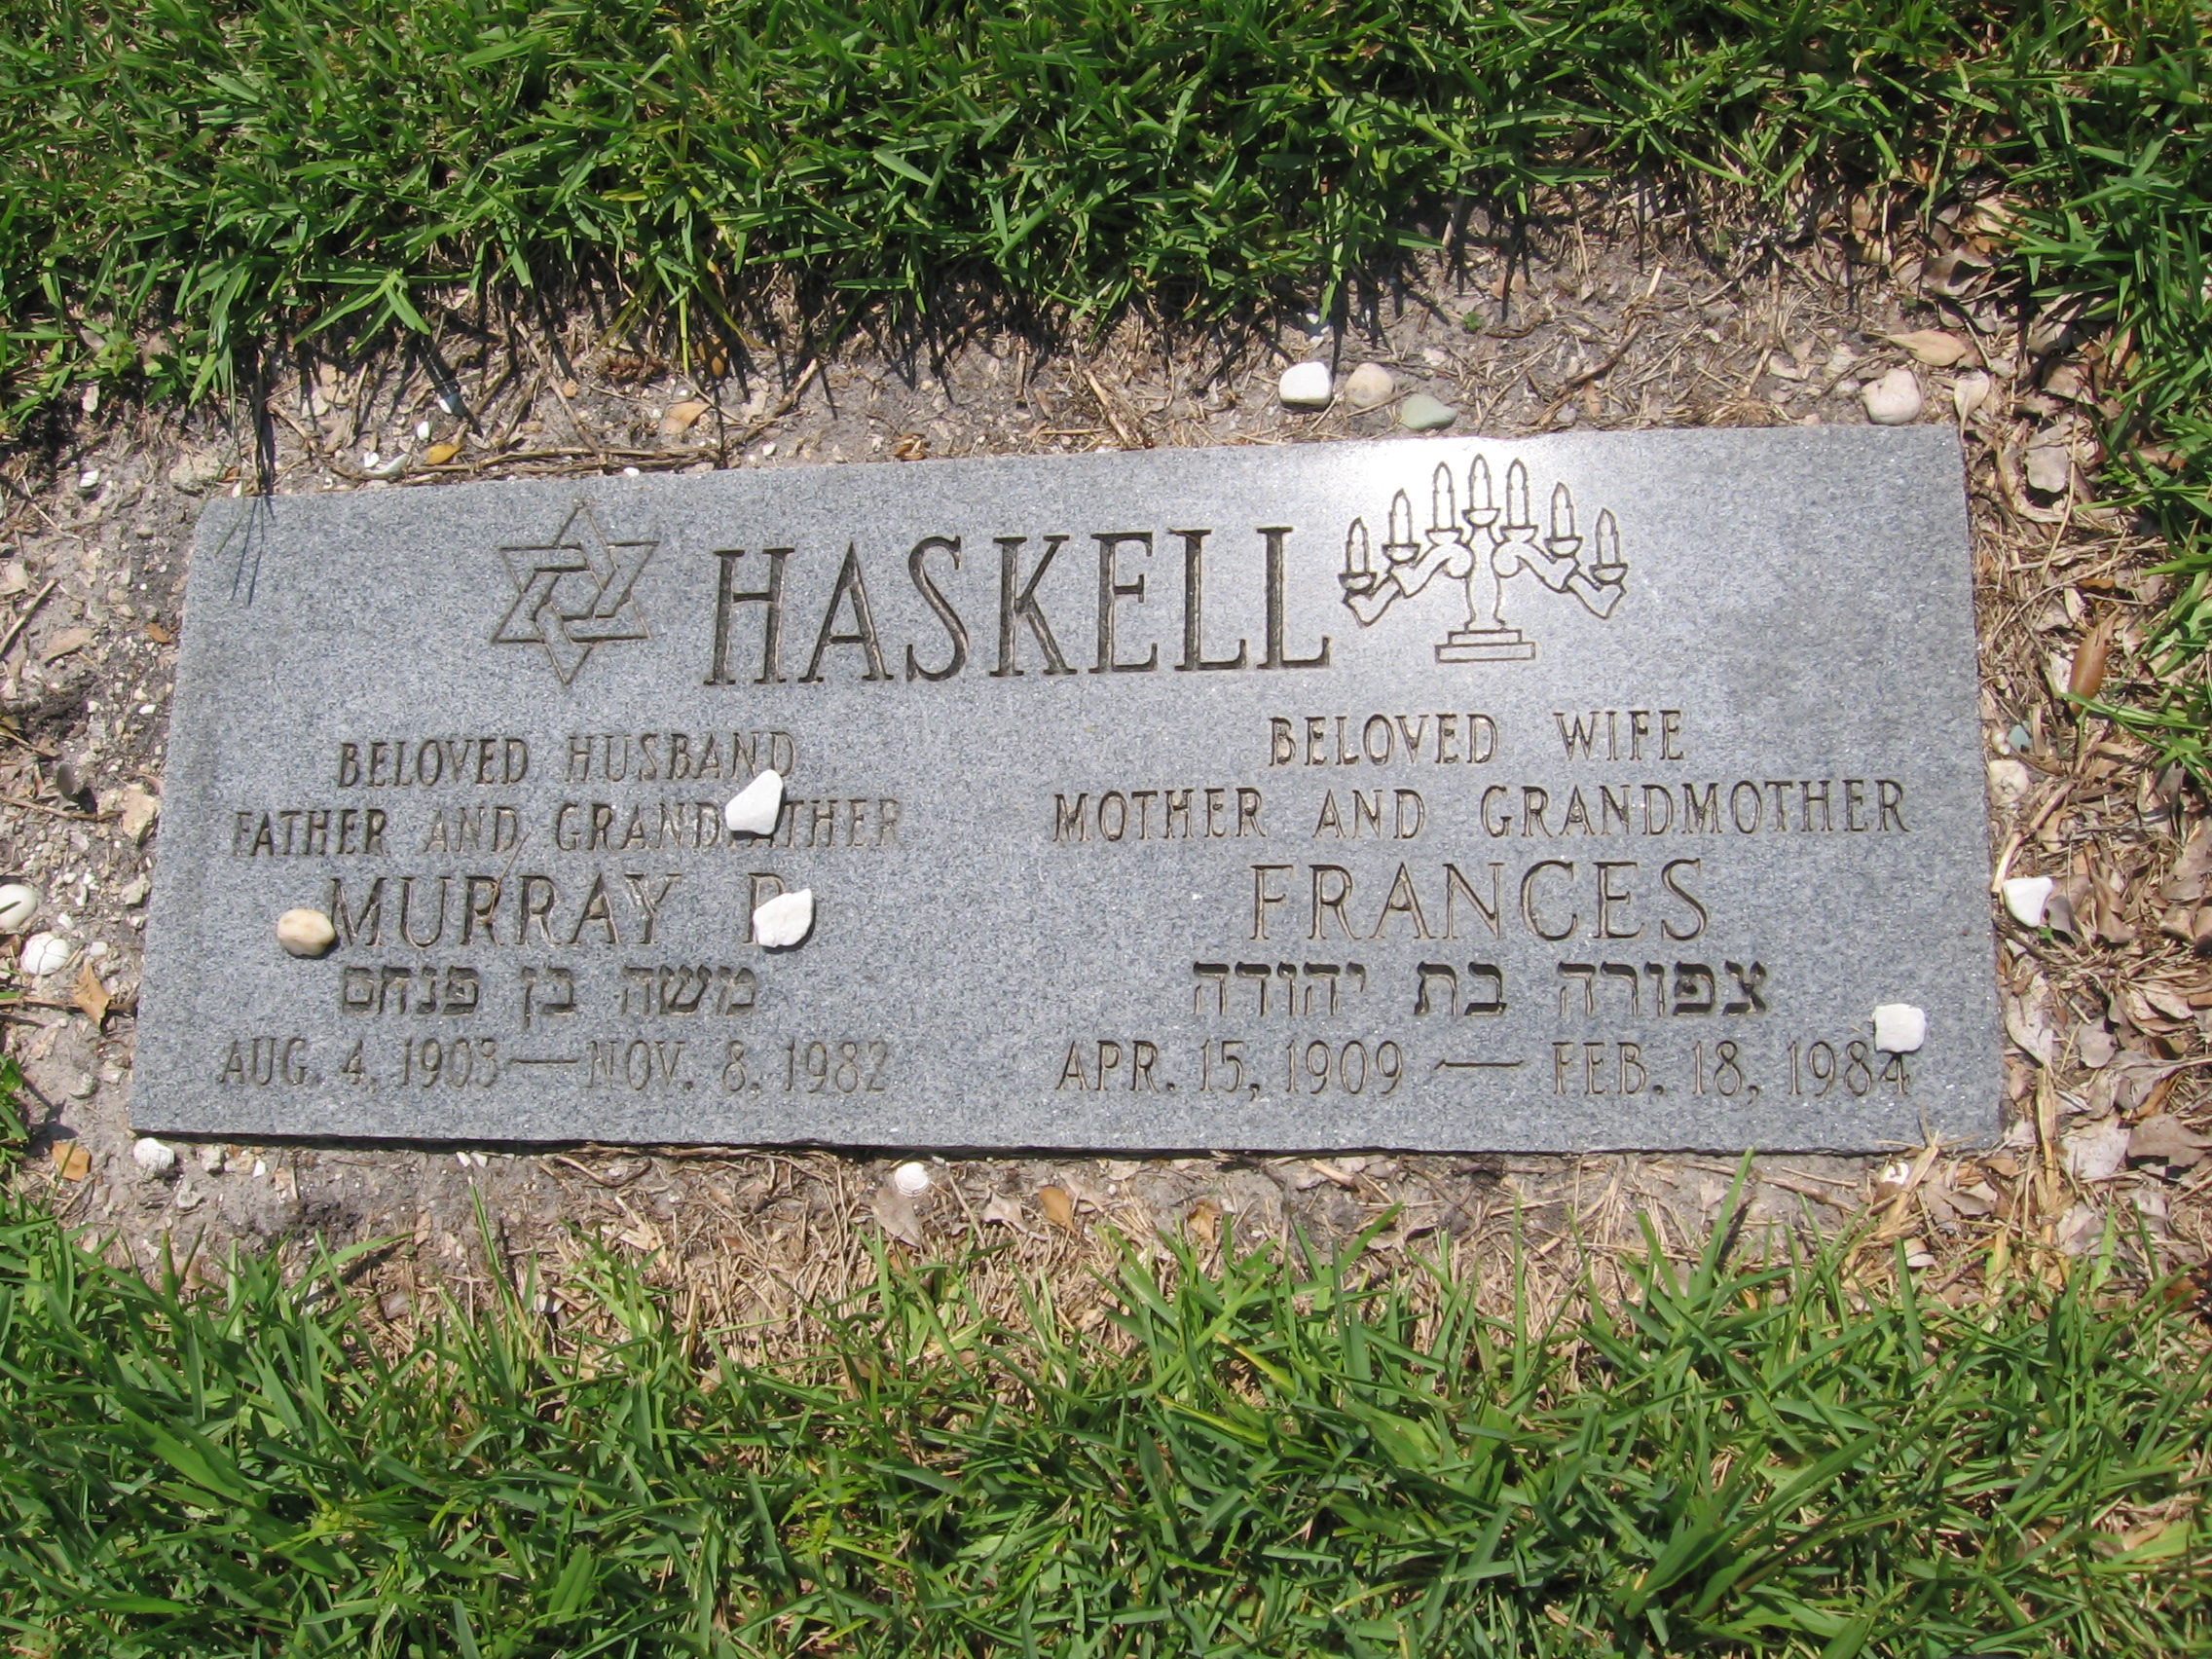 Frances Haskell